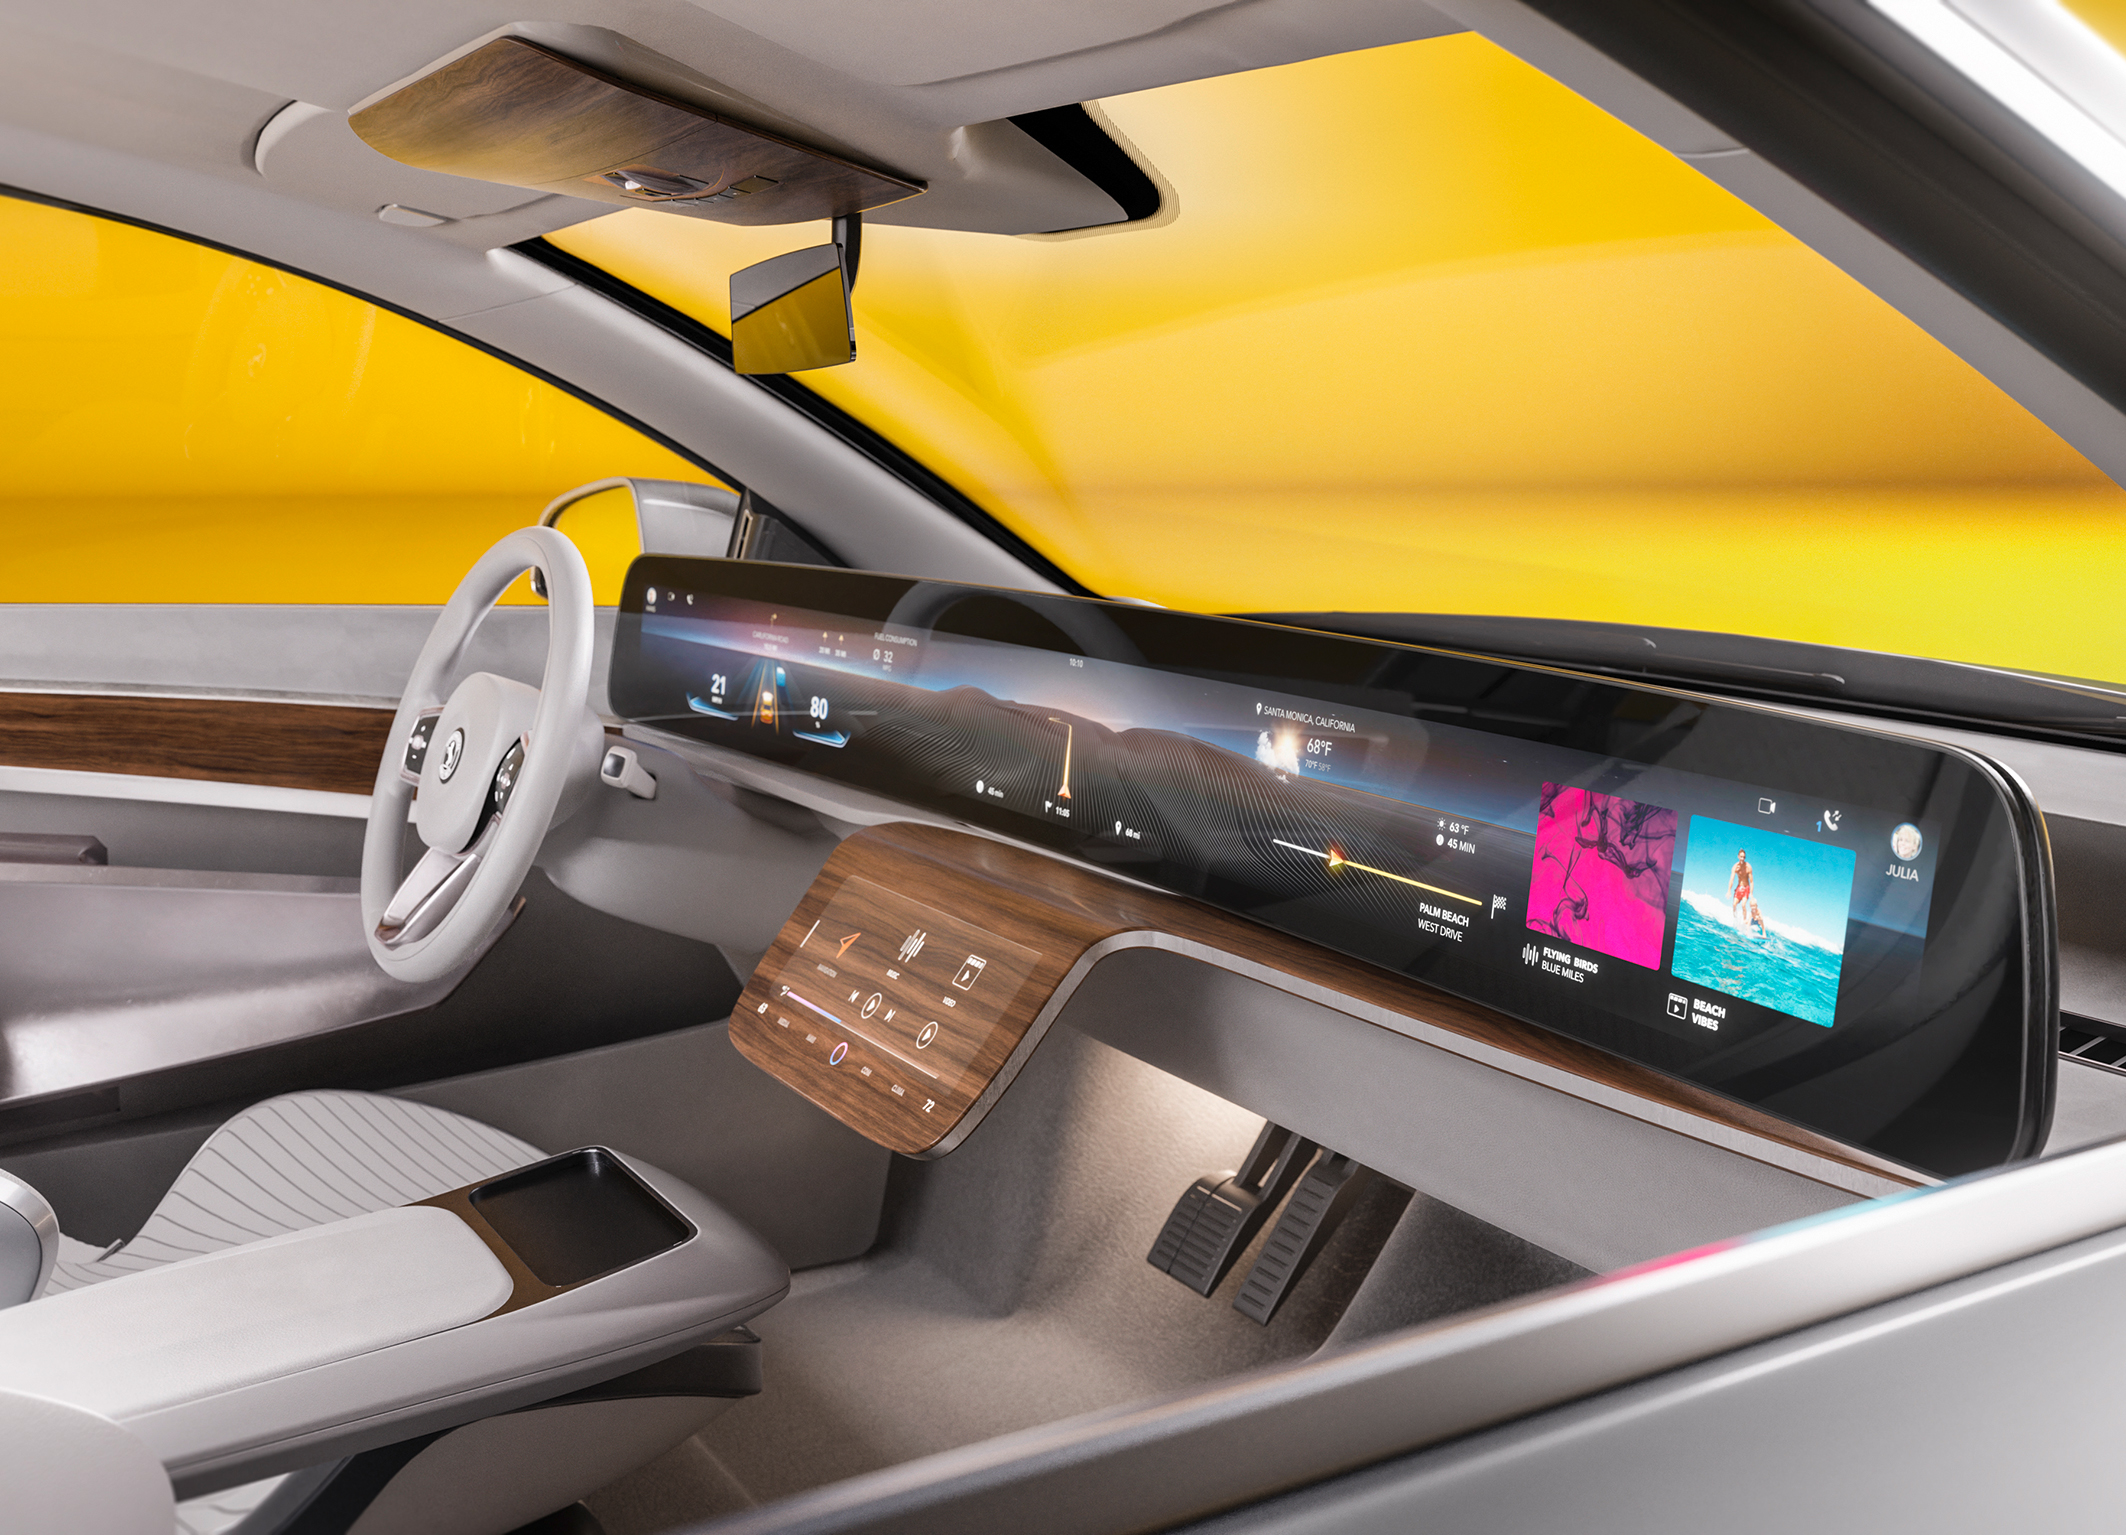 Continental Showcases Curved Display with Invisible Control Panel